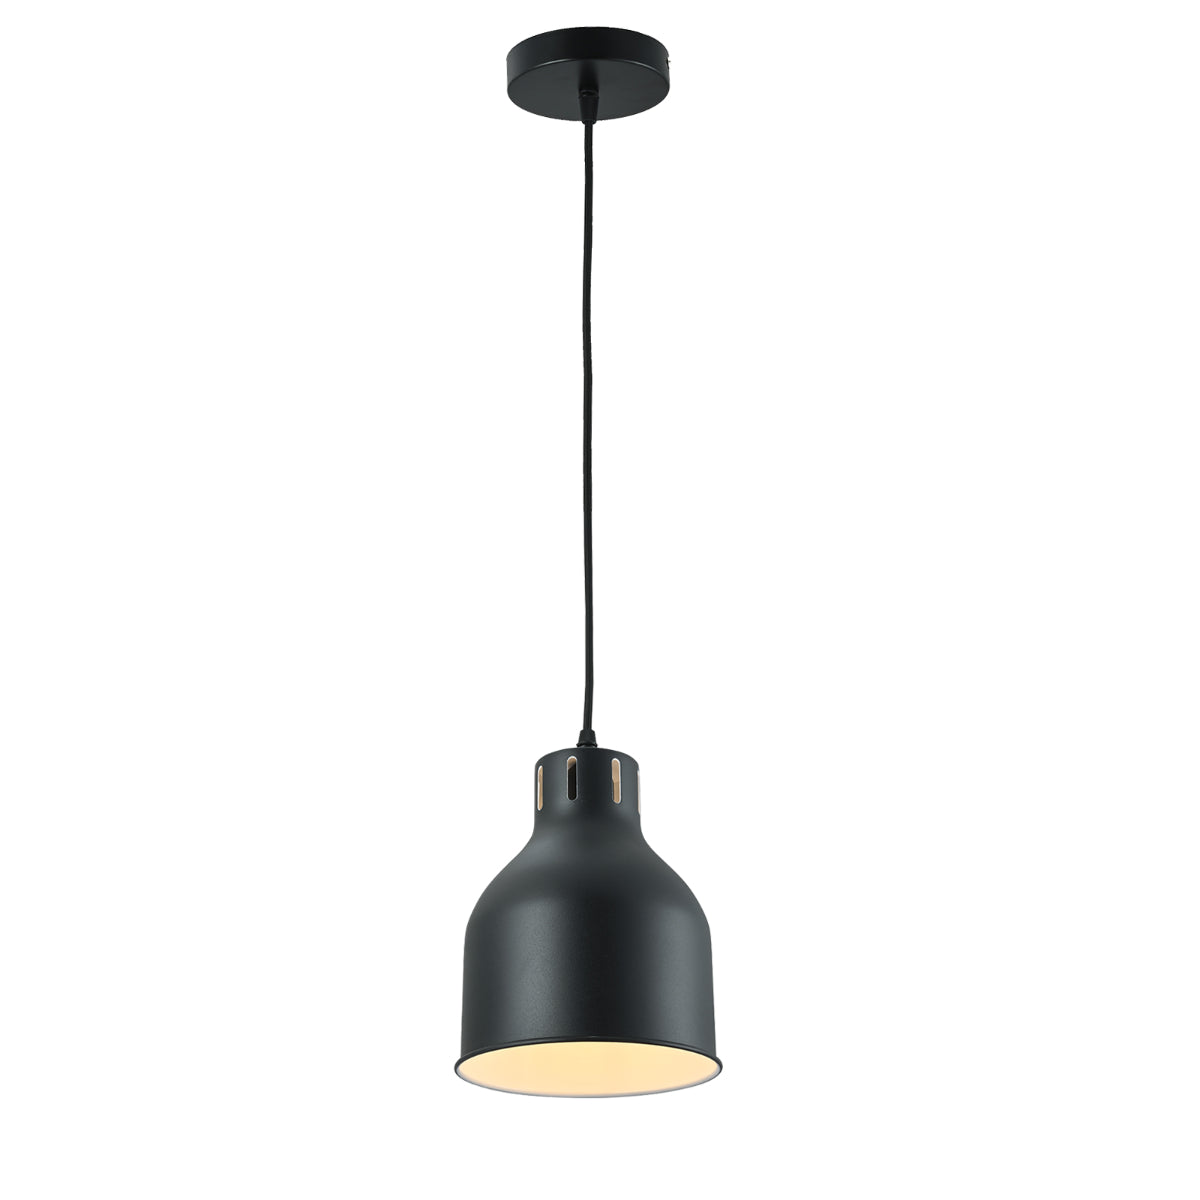 Main image of Contemporary Dome-Topped Cylinder Pendant Light 150-18441